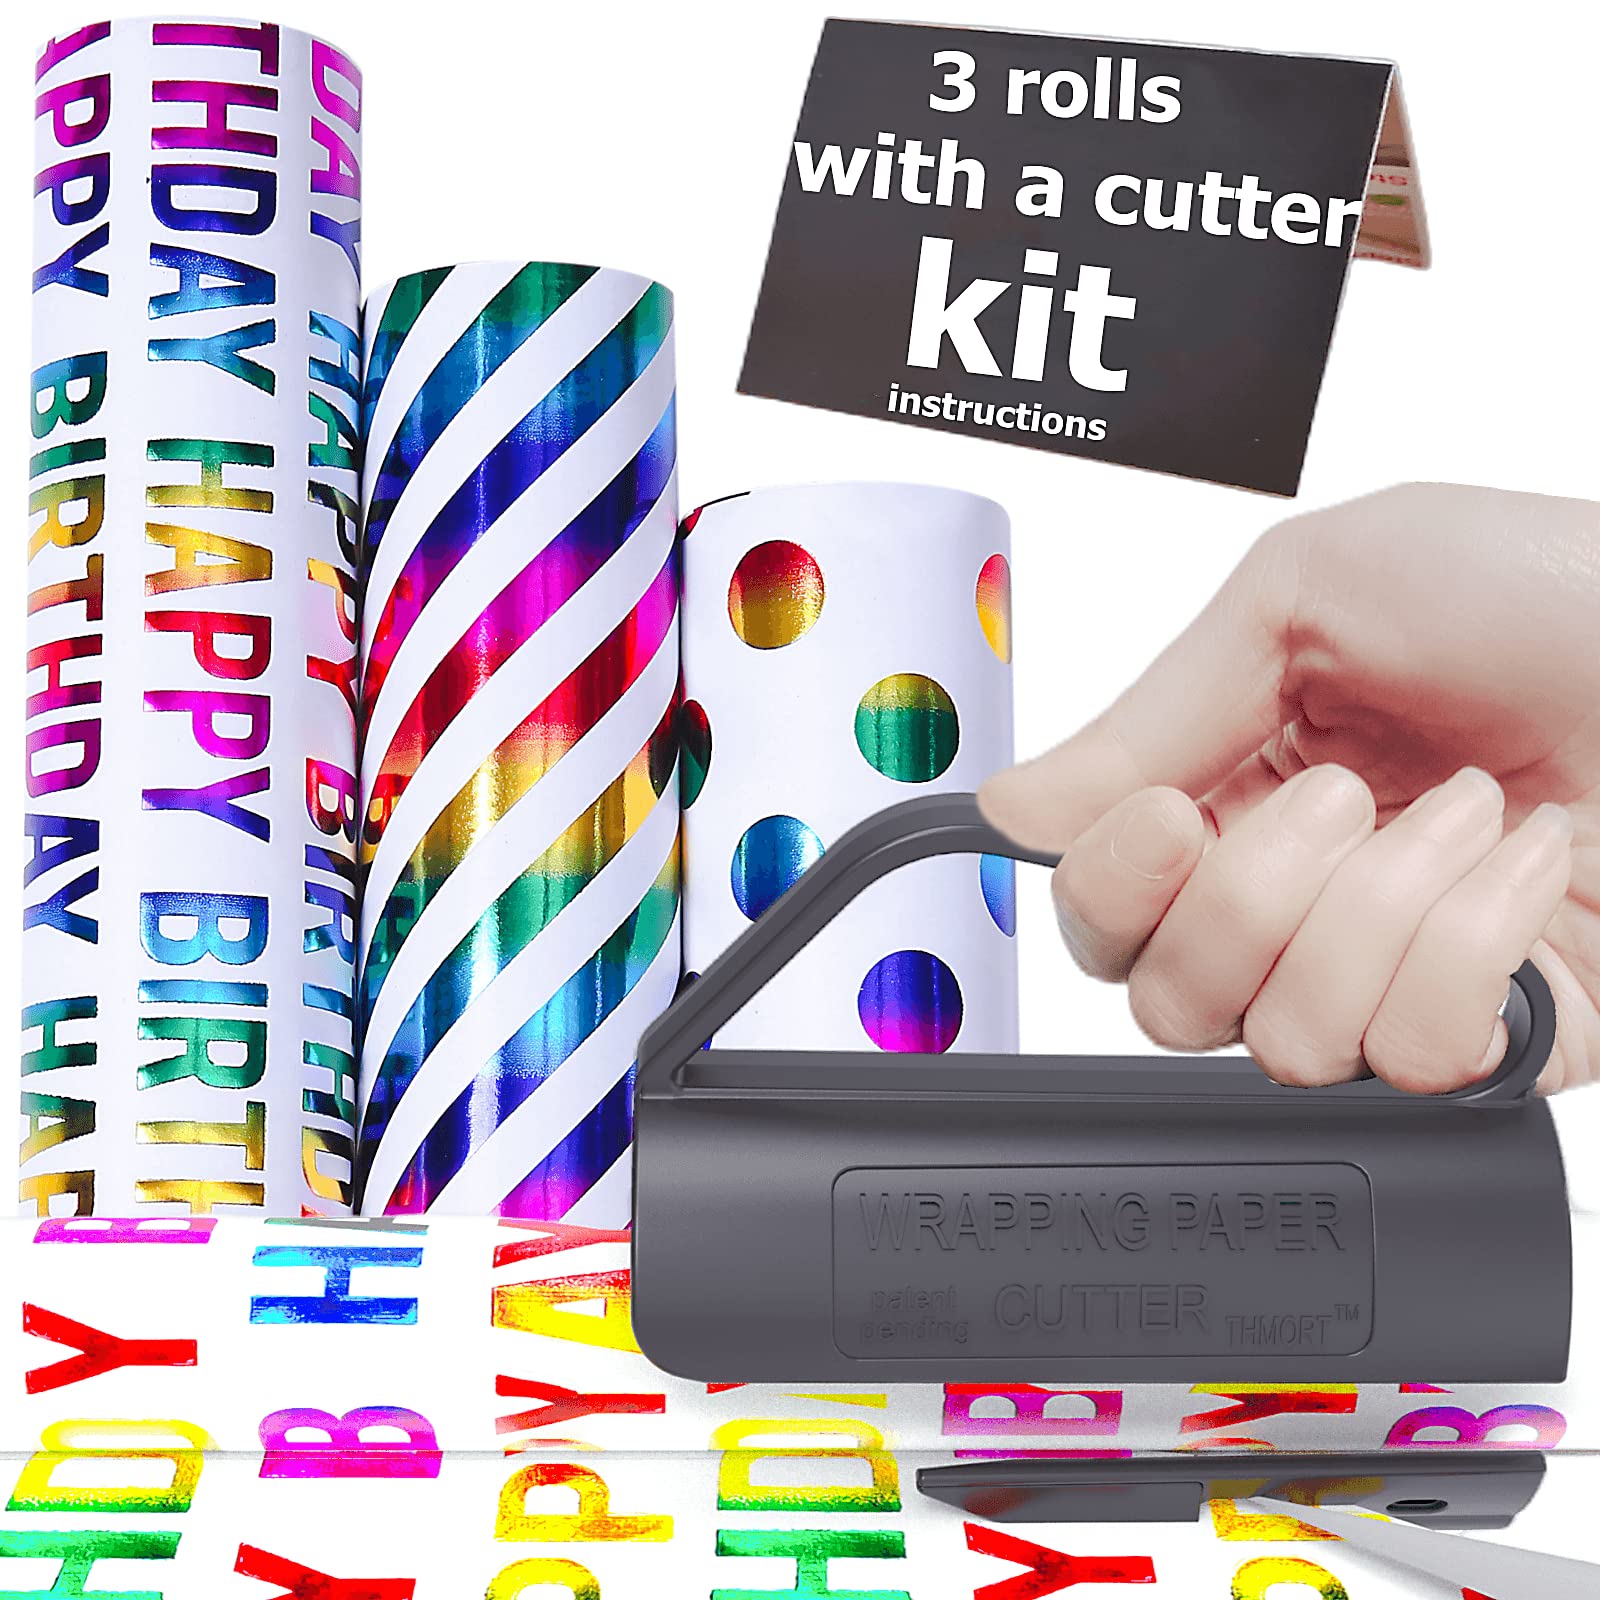 THMORT Colorful Foil Birthday Wrapping Paper Kit With Cutter for Kids & Adults, 17 x 120 Inch Mini Rolls With Rainbow Lettering